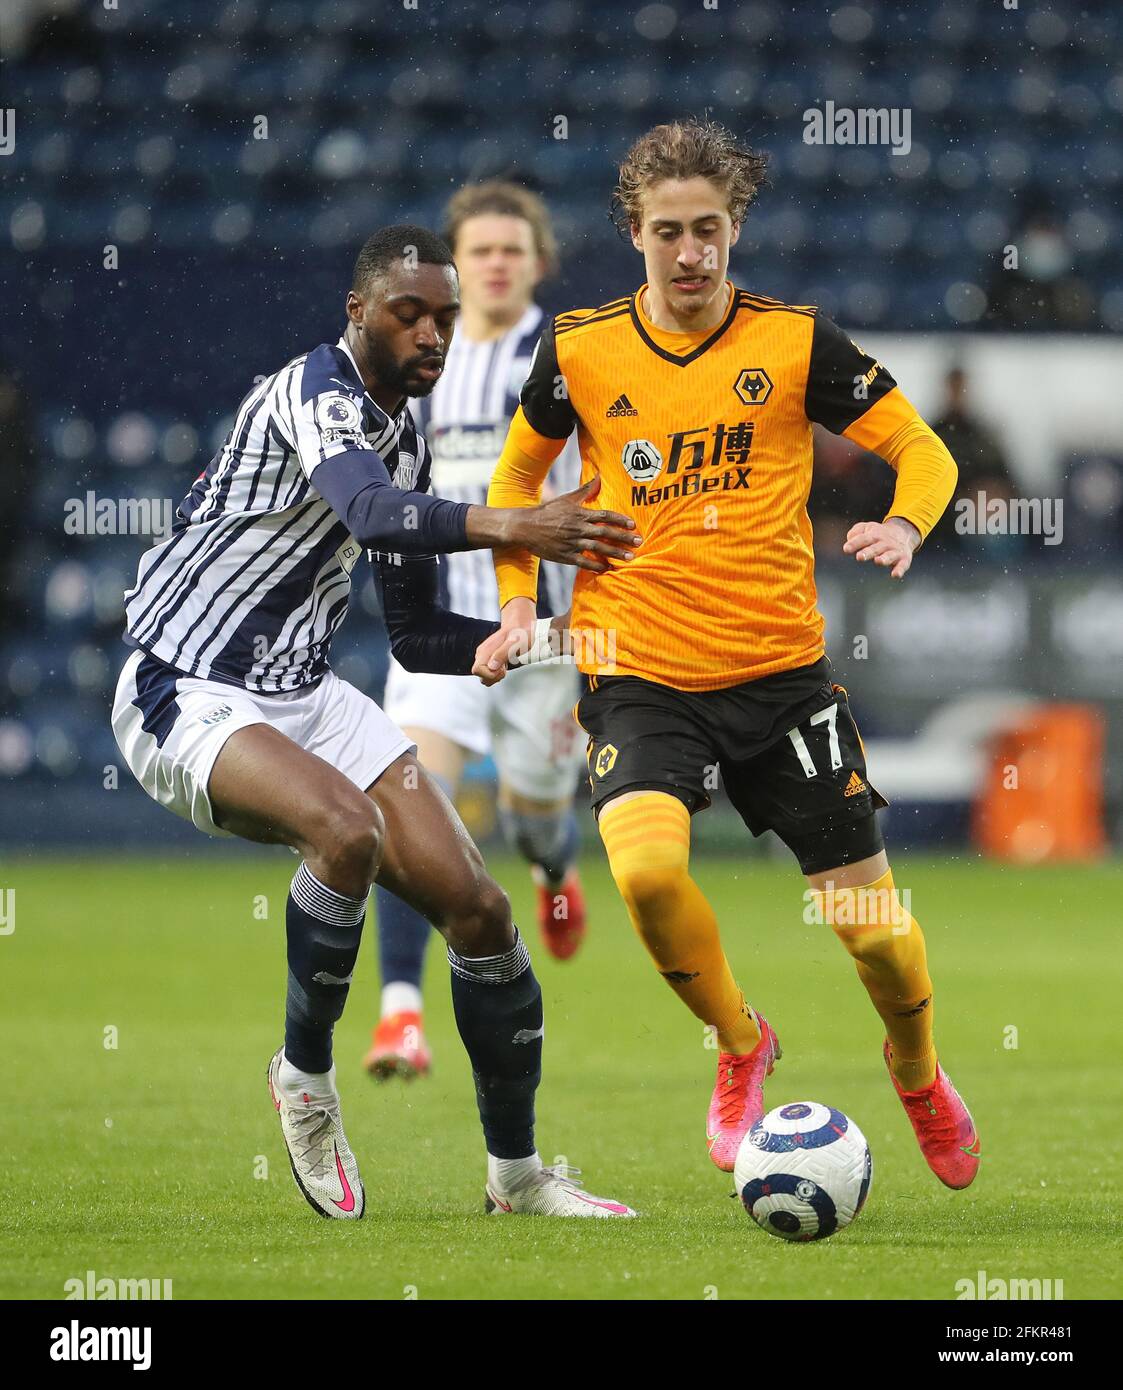 West Bromwich Albion's Semi Ajayi (left) and Wolverhampton Wanderers' Fabio Silva battle for the ball during the Premier League match at The Hawthorns, West Bromwich. Issue date: Monday May 3, 2021. Stock Photo